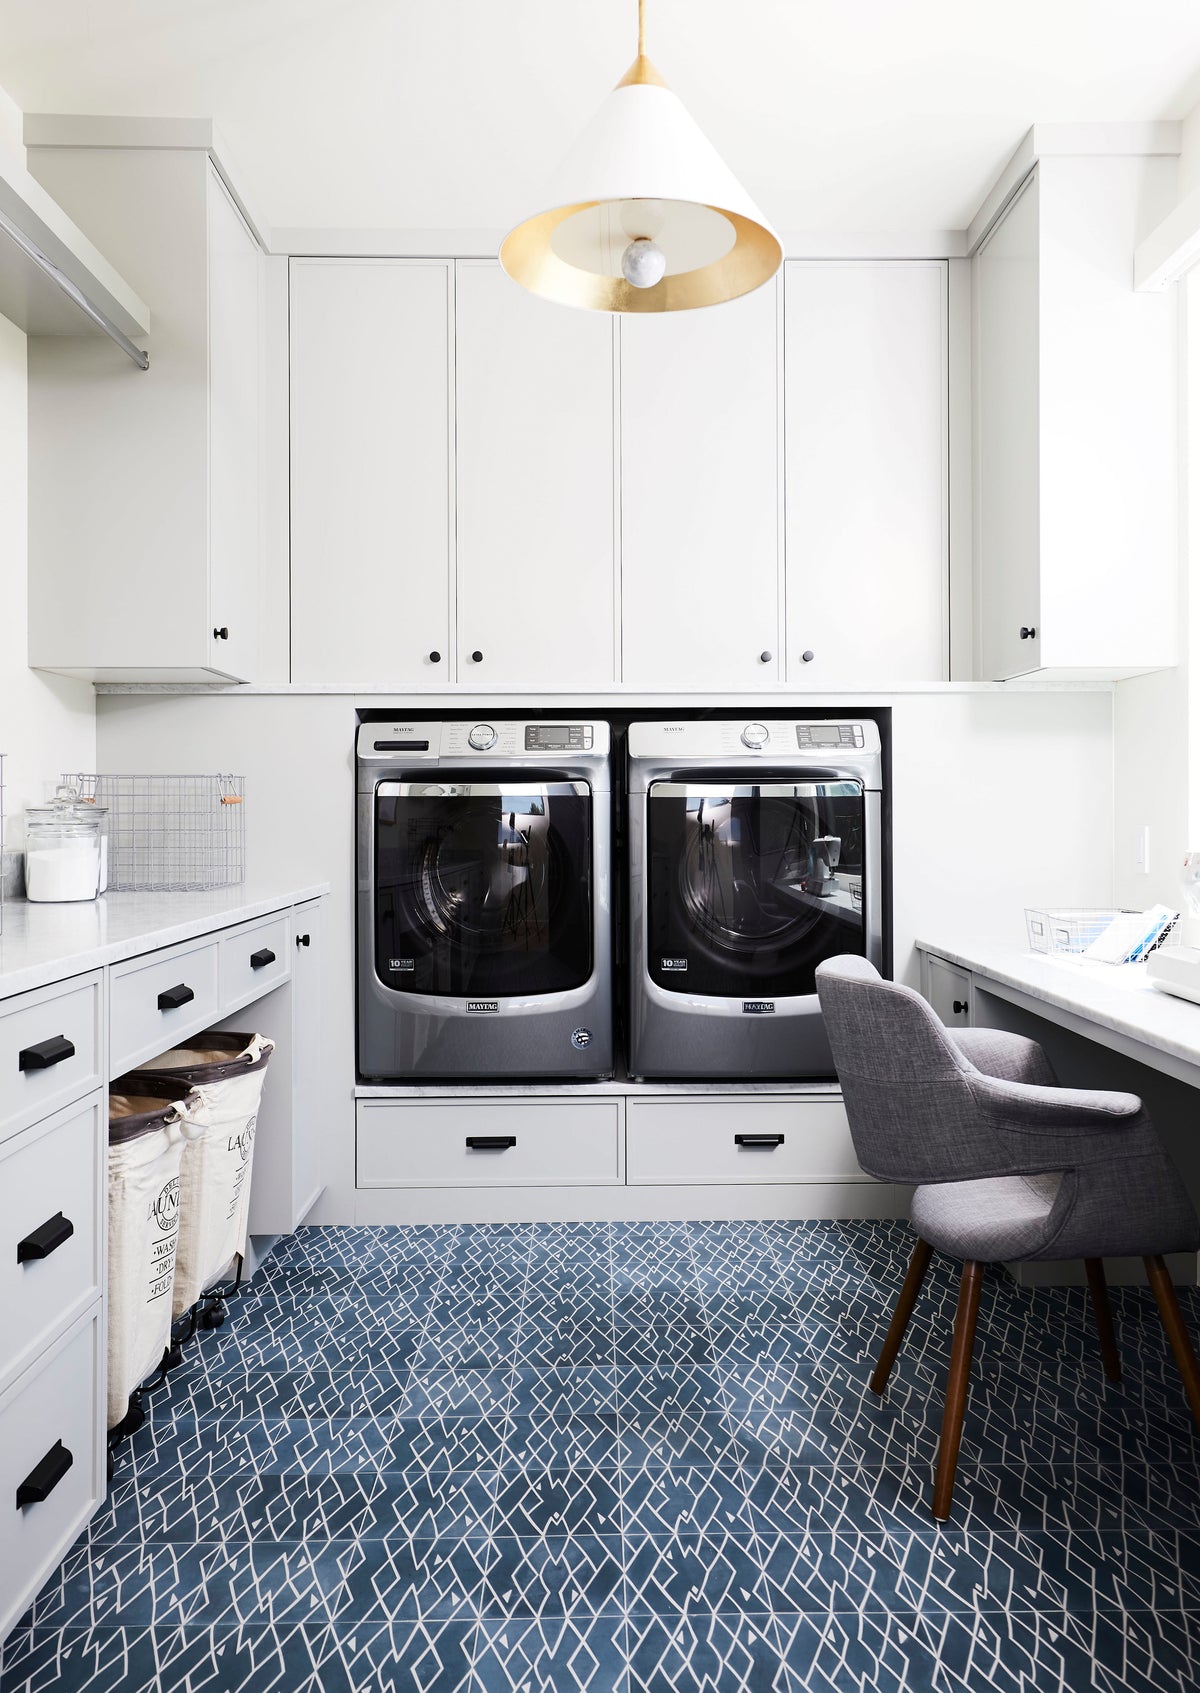 A laundry room/home office with a blue cement tile floor that looks like a rug.